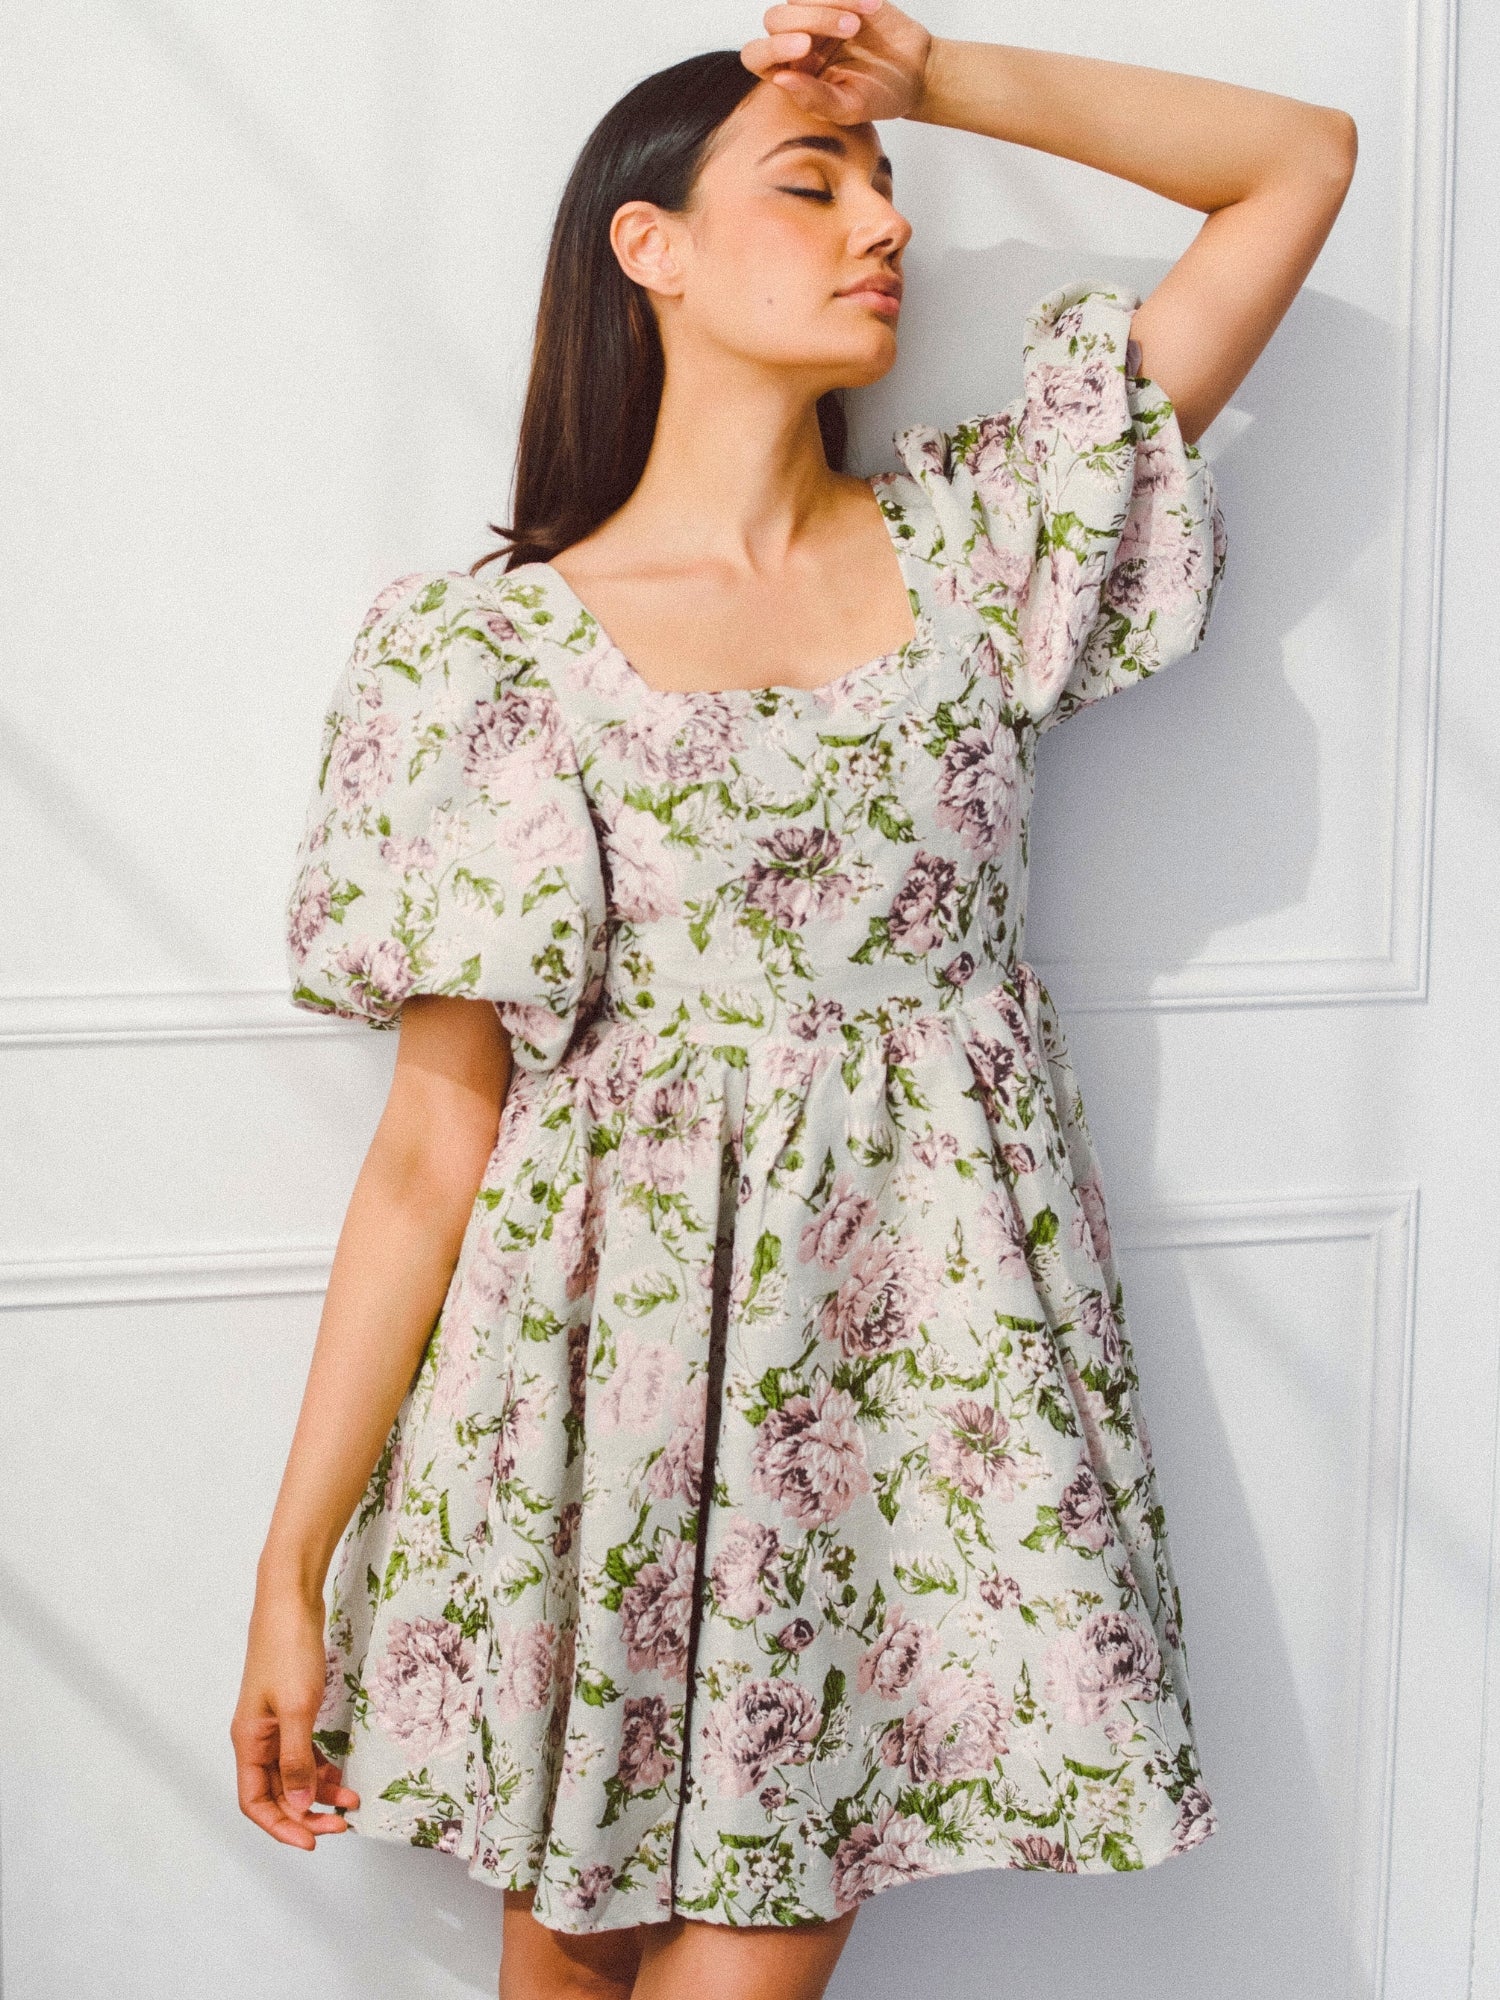 The Meadow Tapestry Mini Dress - The Meadow Tapestry Mini Dress is designed with a large scale floral tapestry fabric. Featuring oversized puff sleeves and an open back with an adjustable tie fastening. Lined in a soft touch fabric. - Ivory Sheep Collecti